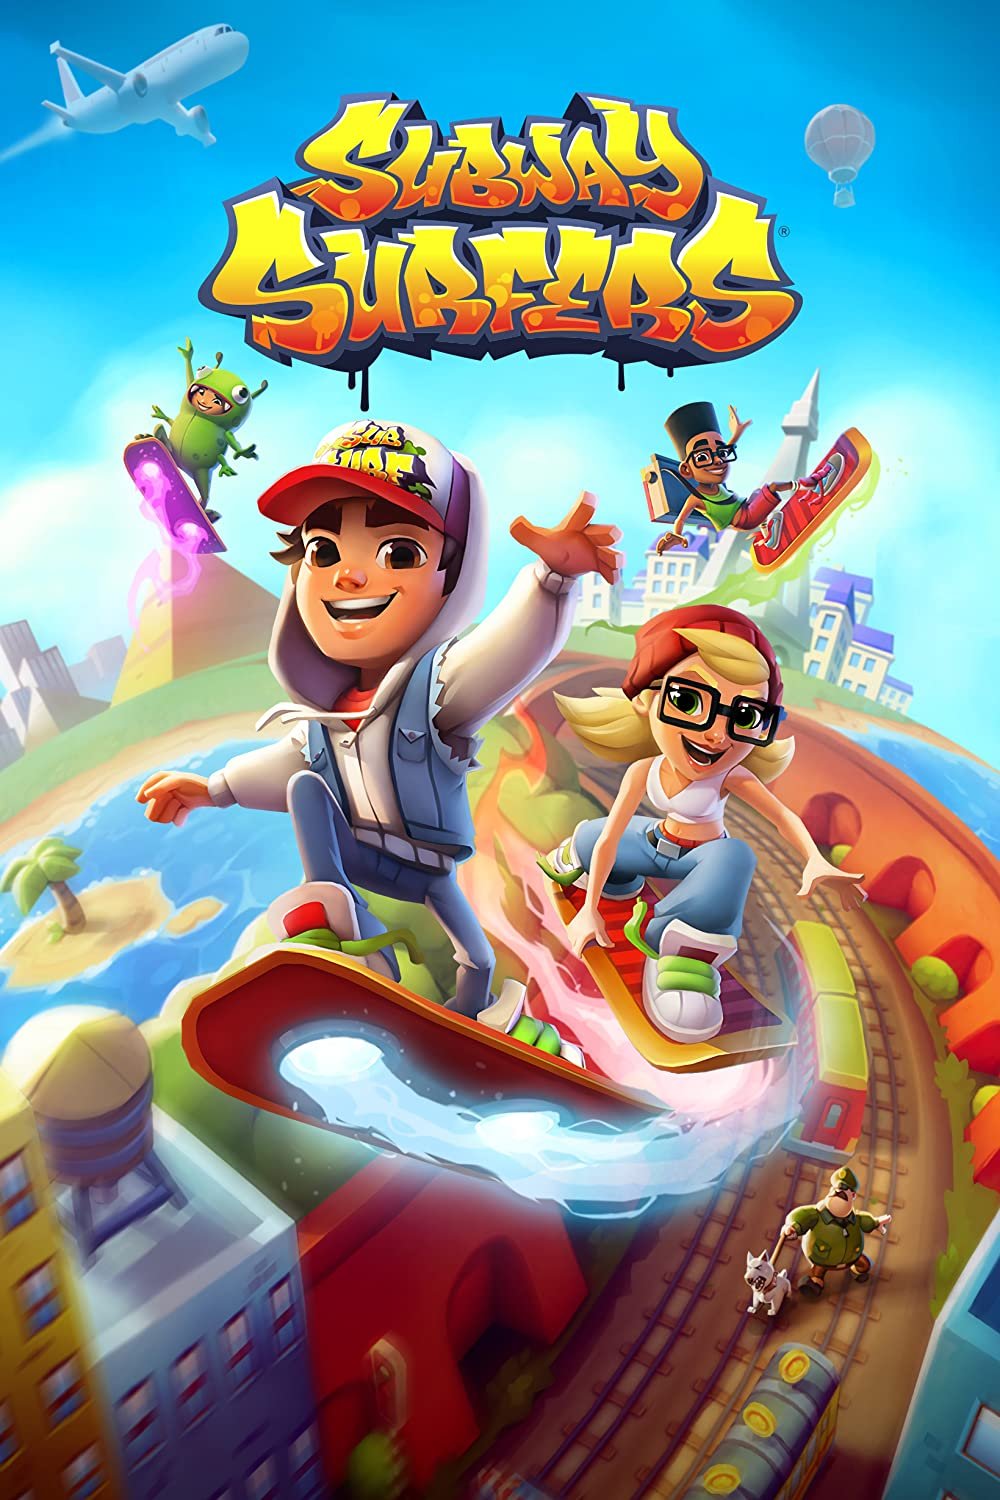 Subway surfers record boost by Gonyfig